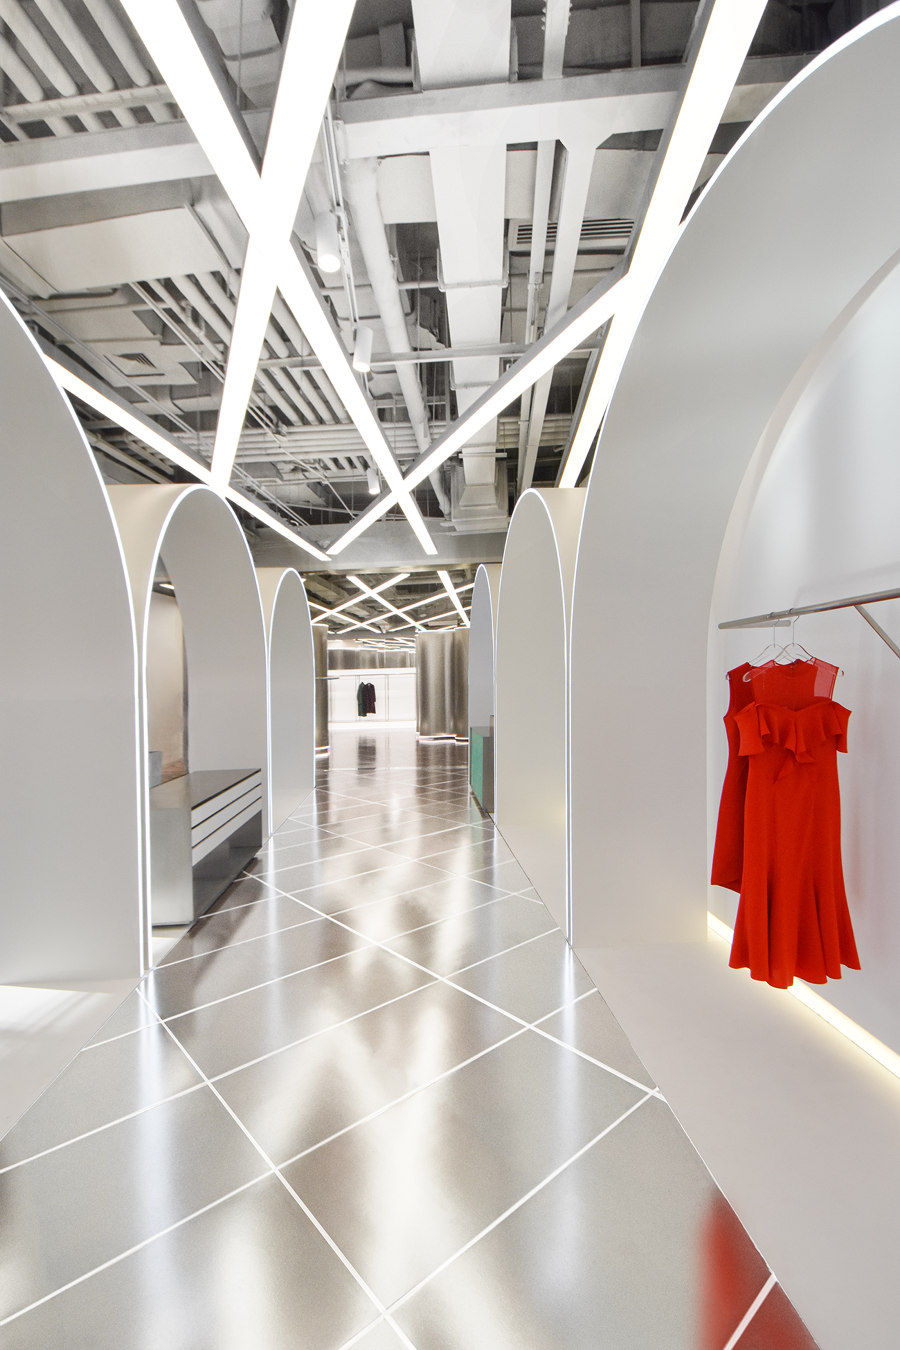 TGY Multi-Brand Fashion and Event Store by Ramoprimo | Shop interiors